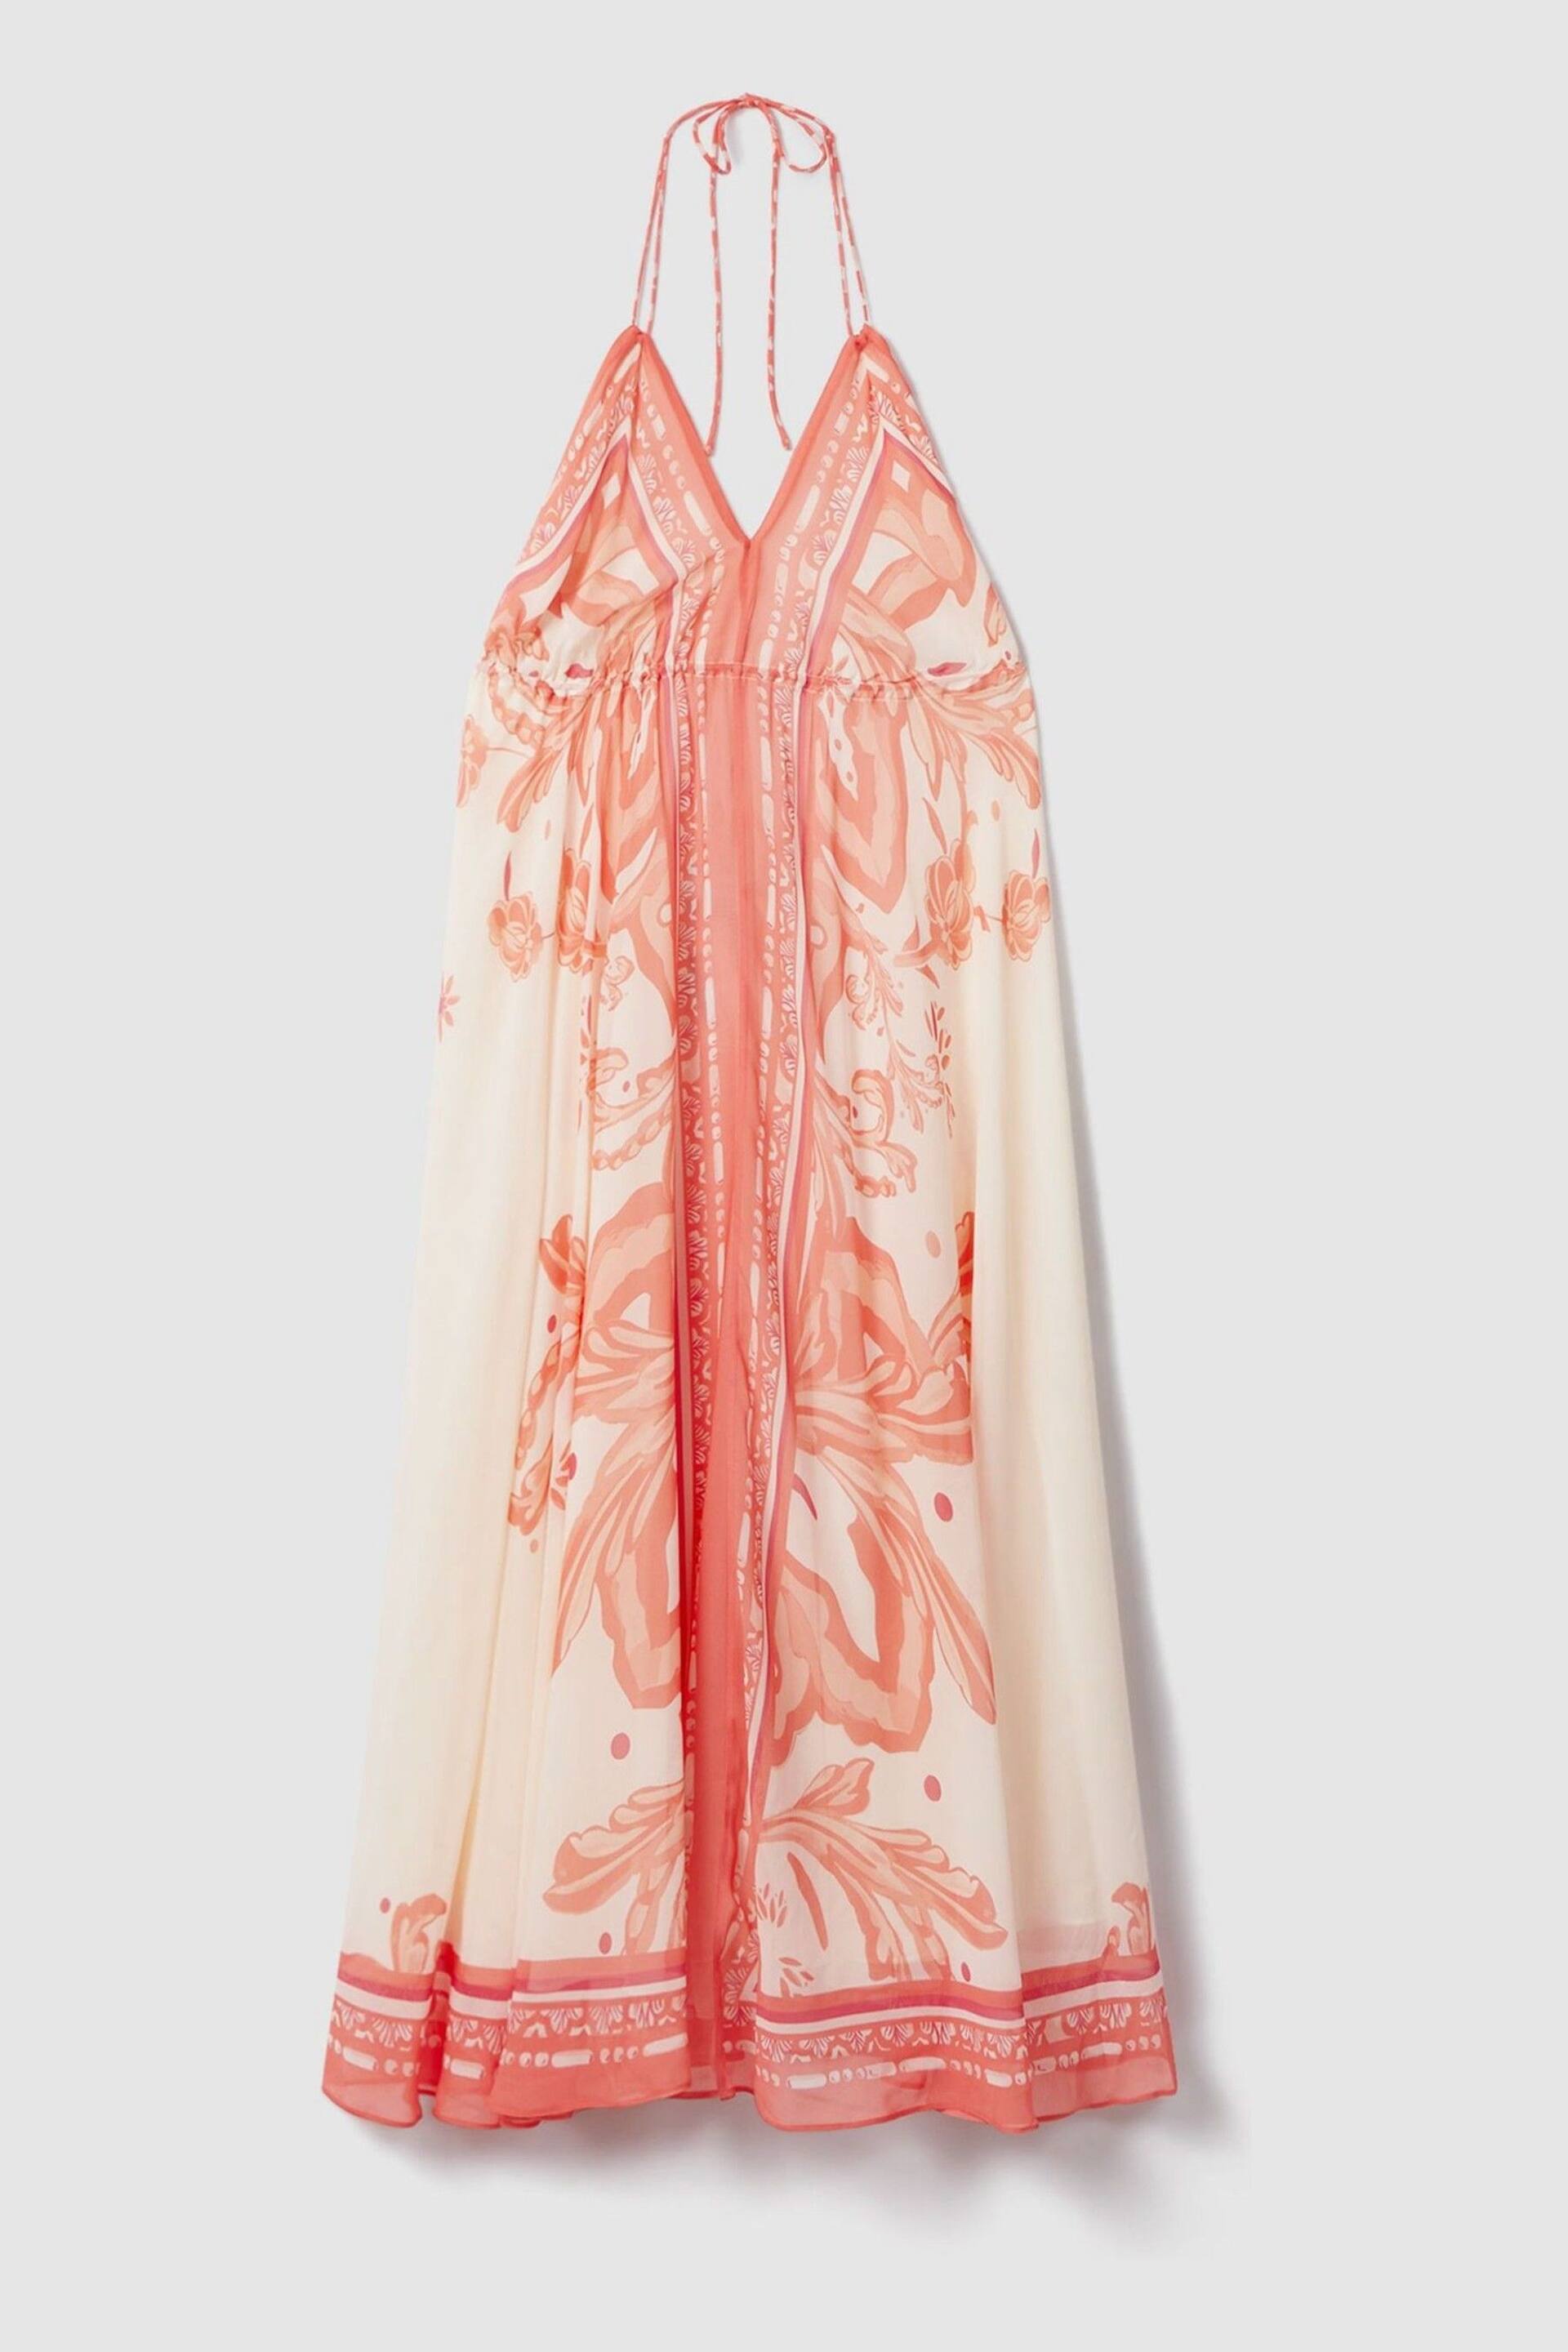 Reiss Coral Delilah Printed Ruched Waist Midi Dress - Image 2 of 6